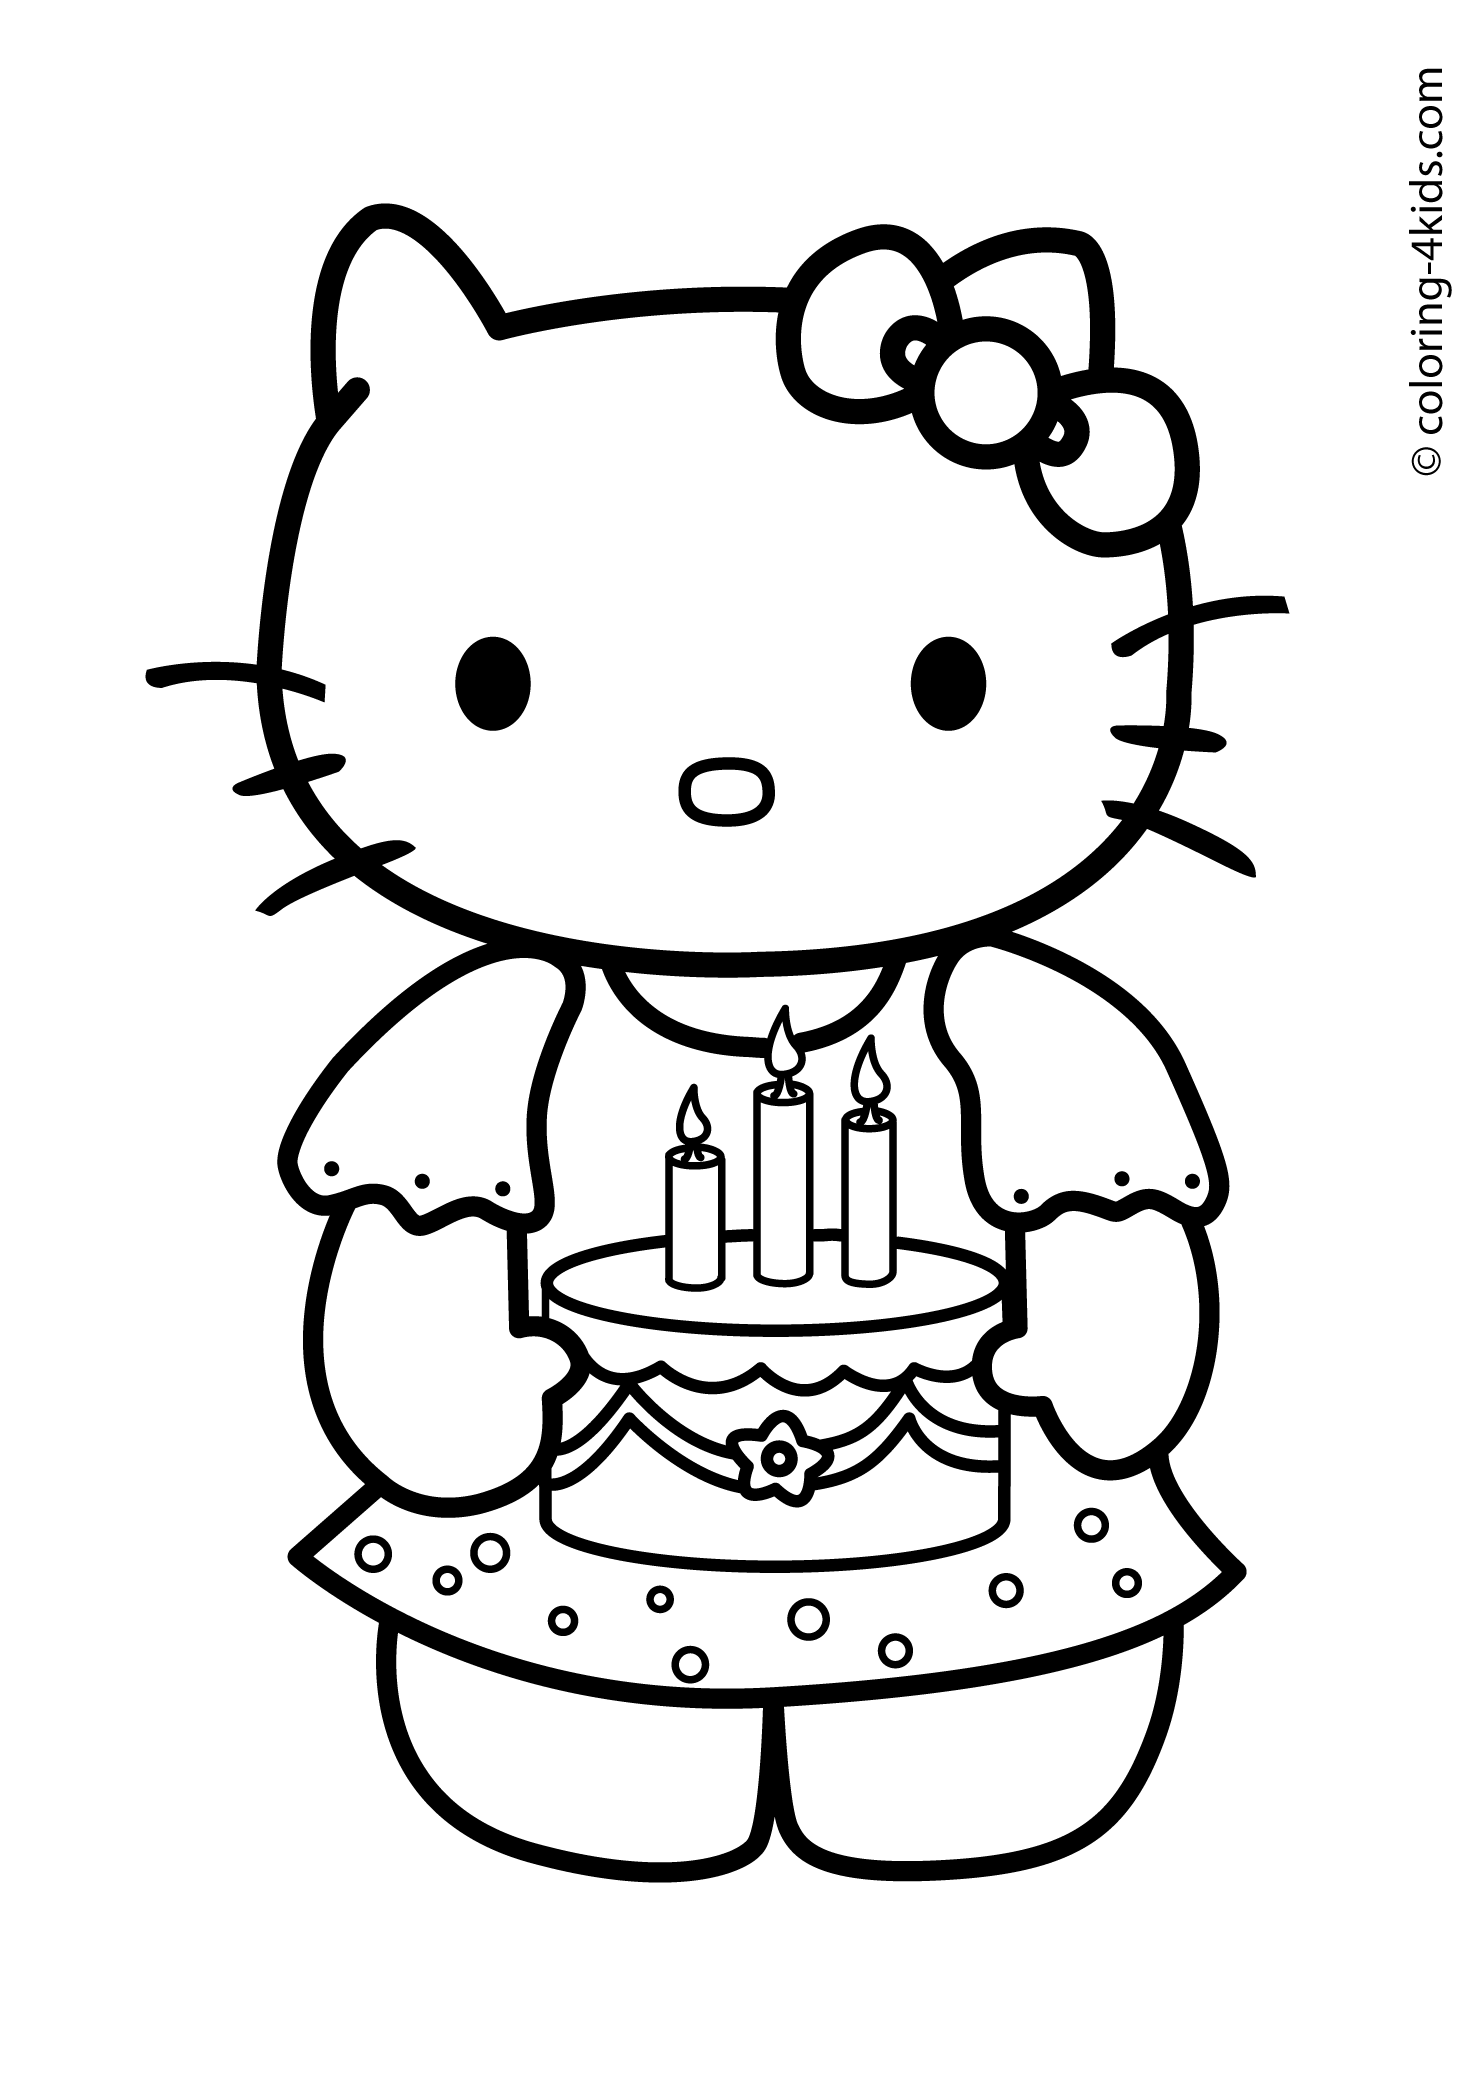 hello kitty happy birthday coloring pages hello kitty happy birthday coloring pages pinterest coloring kitty happy pages hello birthday 